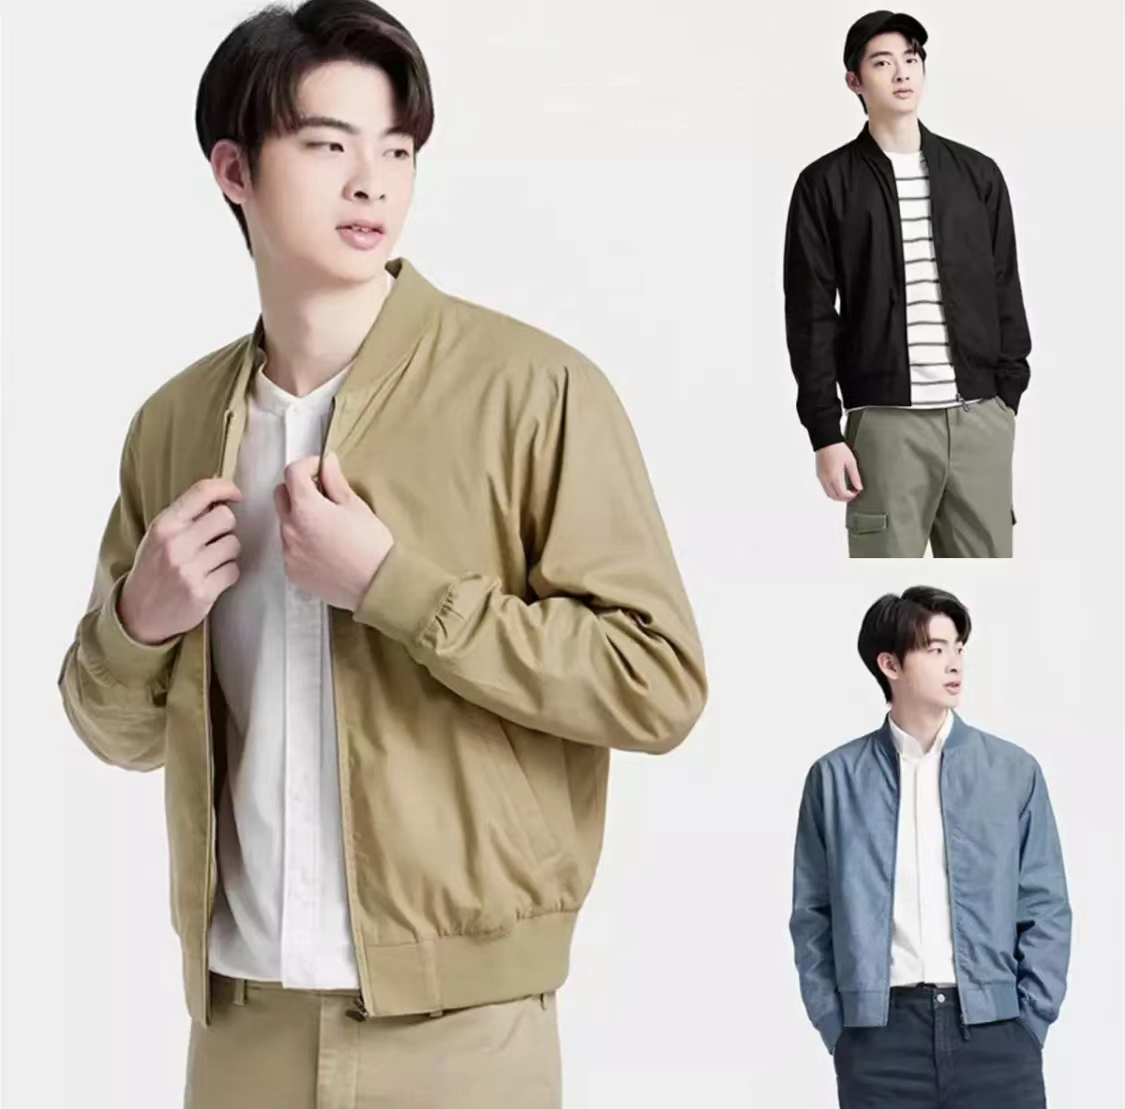 Please help me find this bomber jacket. Seen on Korean TV show 